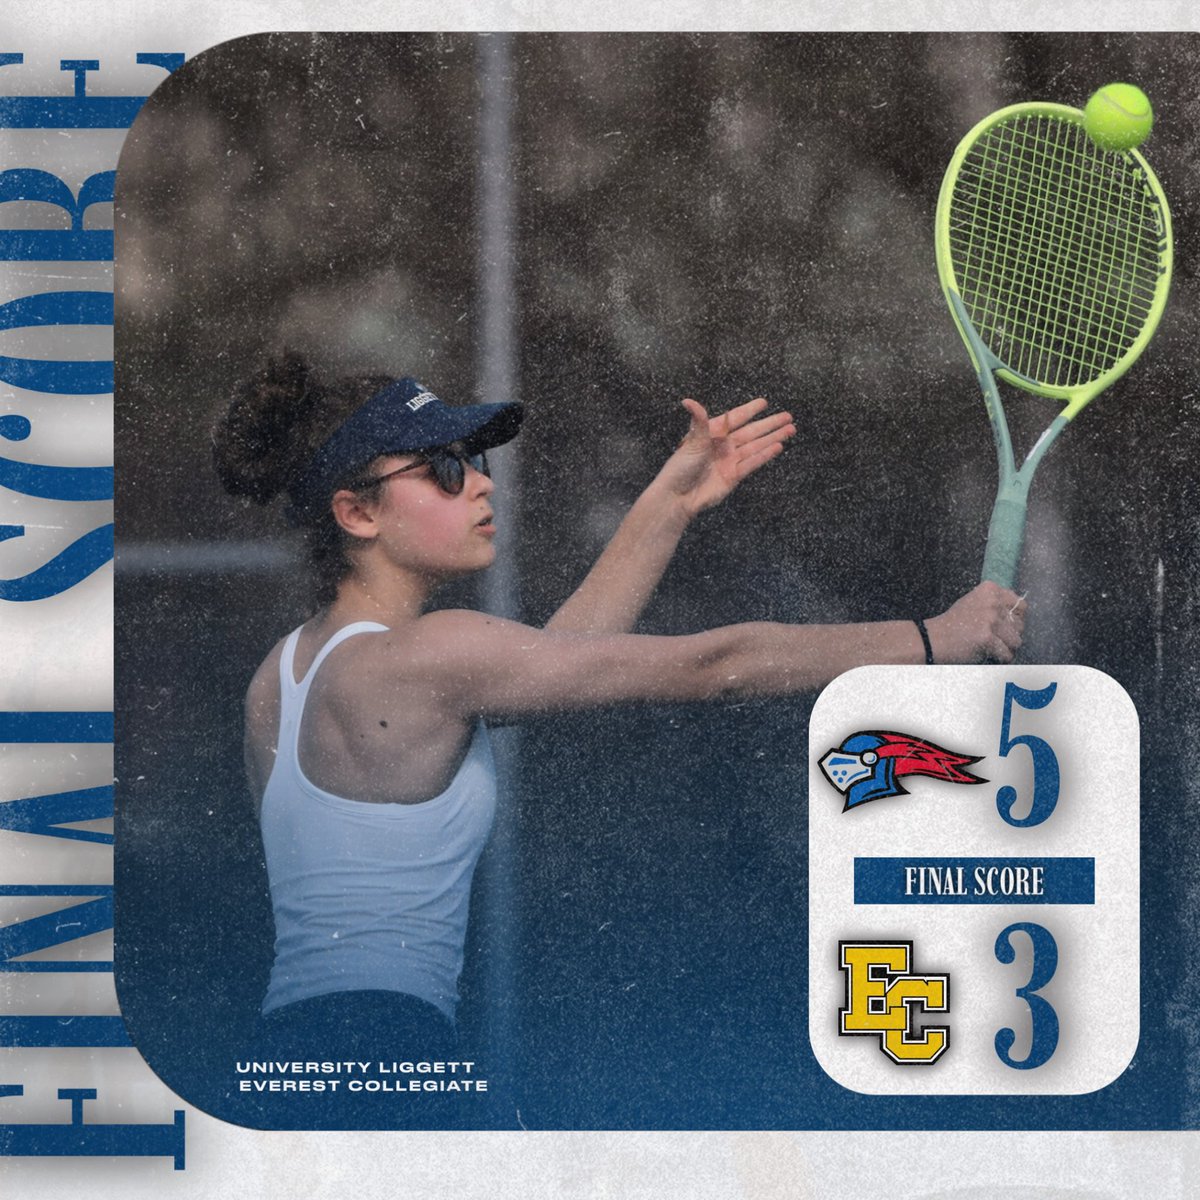 Girls’ Lacrosse remains unbeaten with win over North Farmington and Girls’ Tennis maintains their hot hand as they prevail in @CHSL1926 matchup vs. Everest Collegiate. #GoKnights 🥍🎾